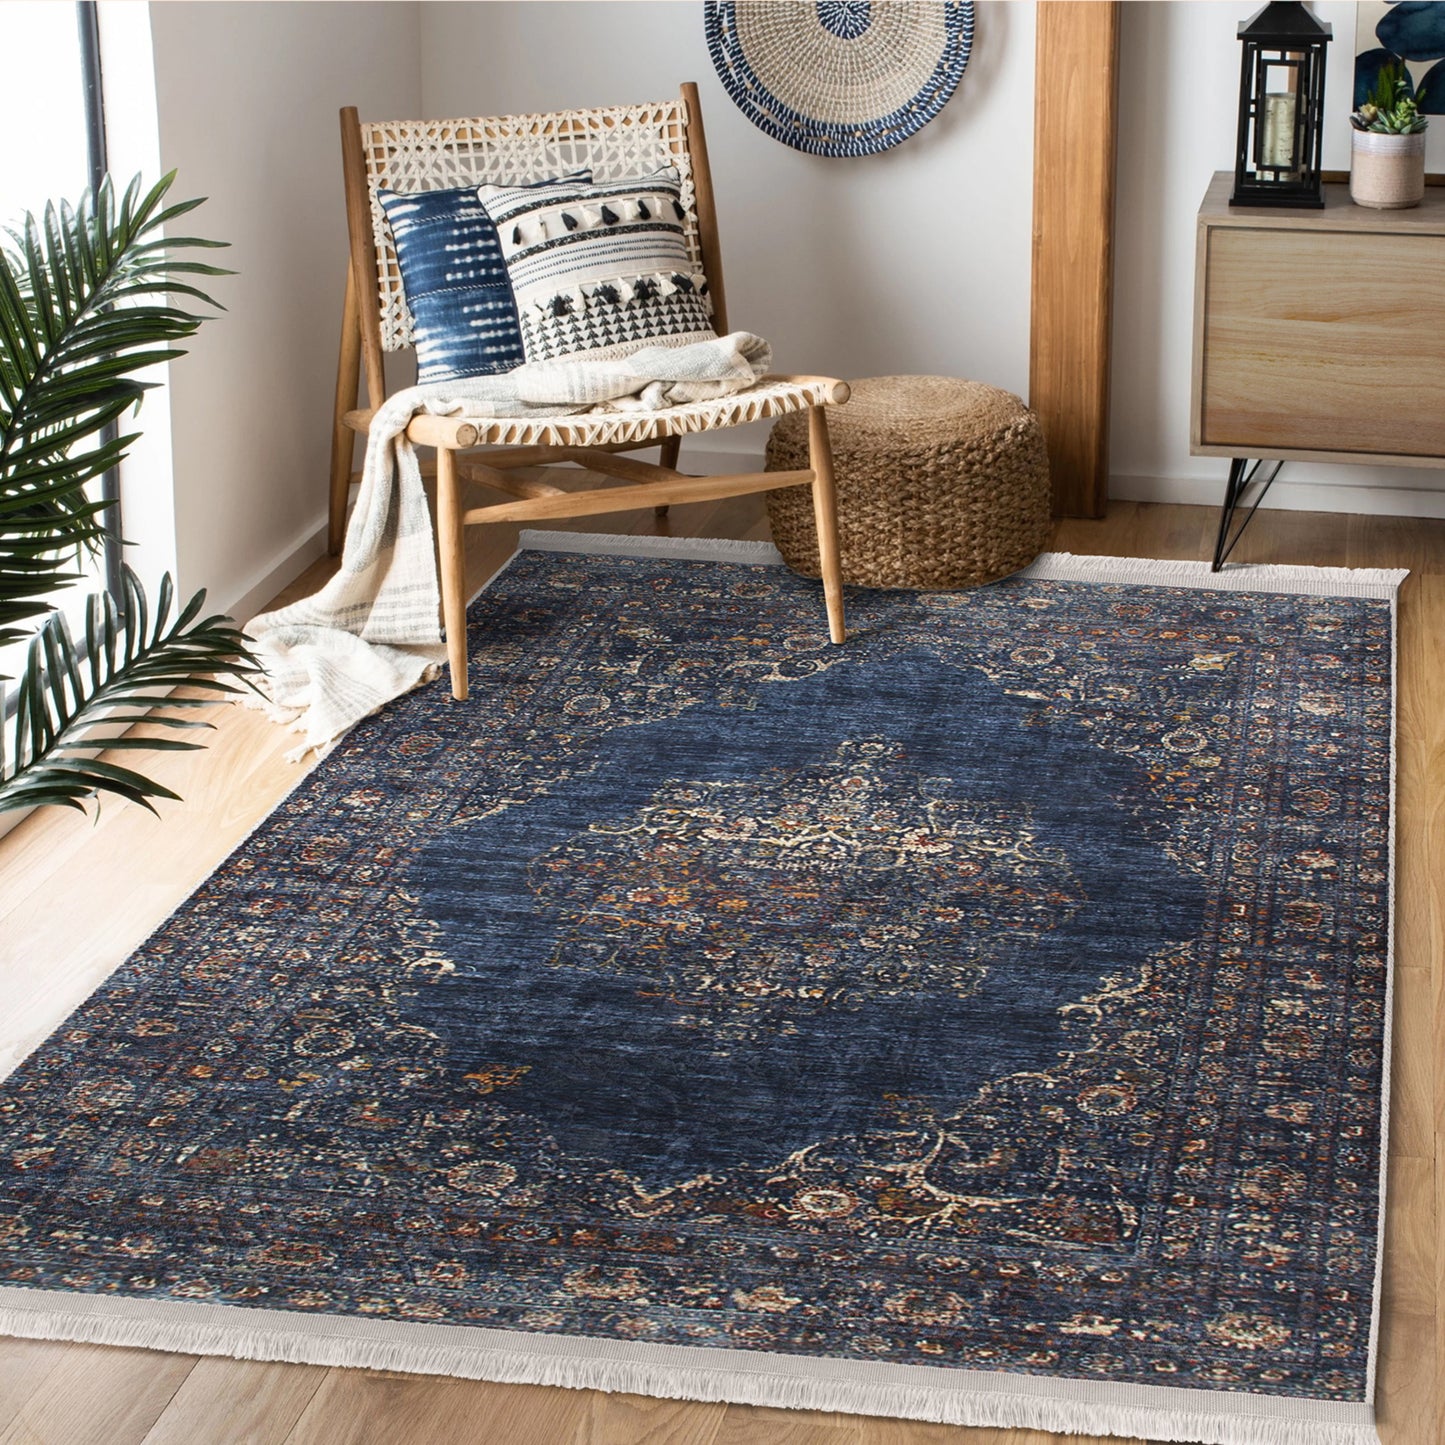 Soft and Durable Homeezone Rug - Bedroom Placement